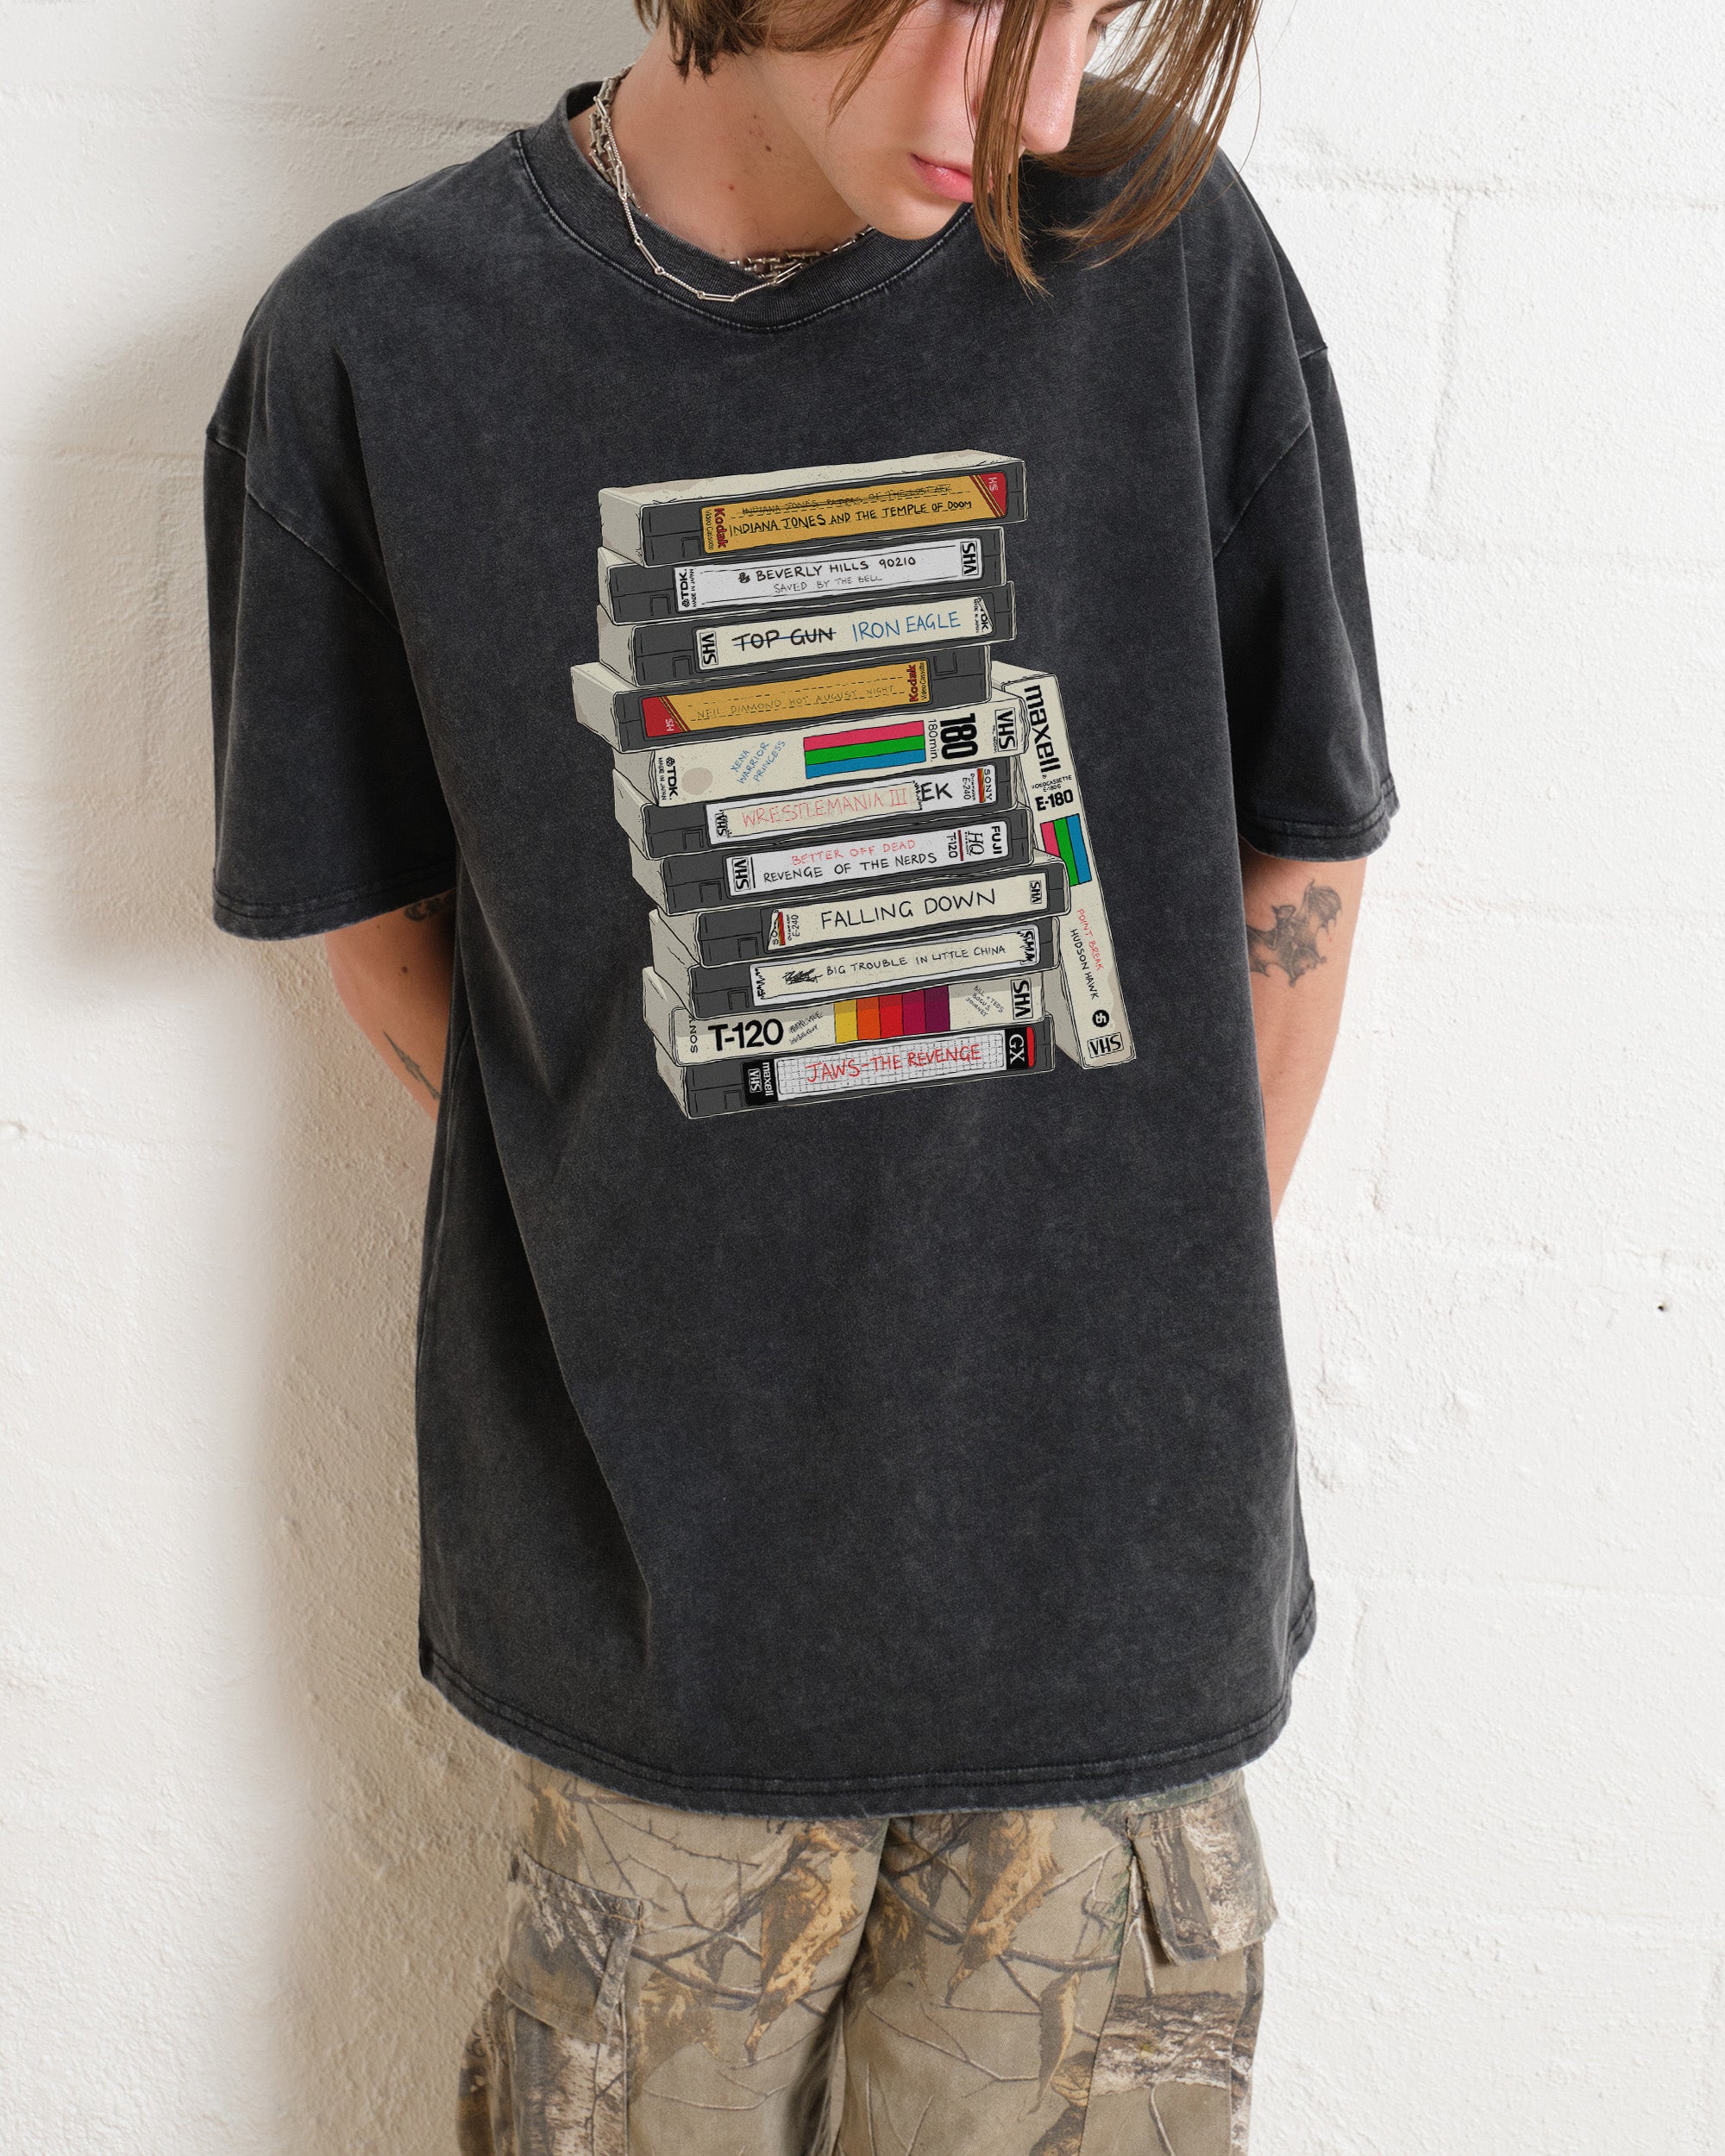 VHS Tapes Wash Tee Australia Online